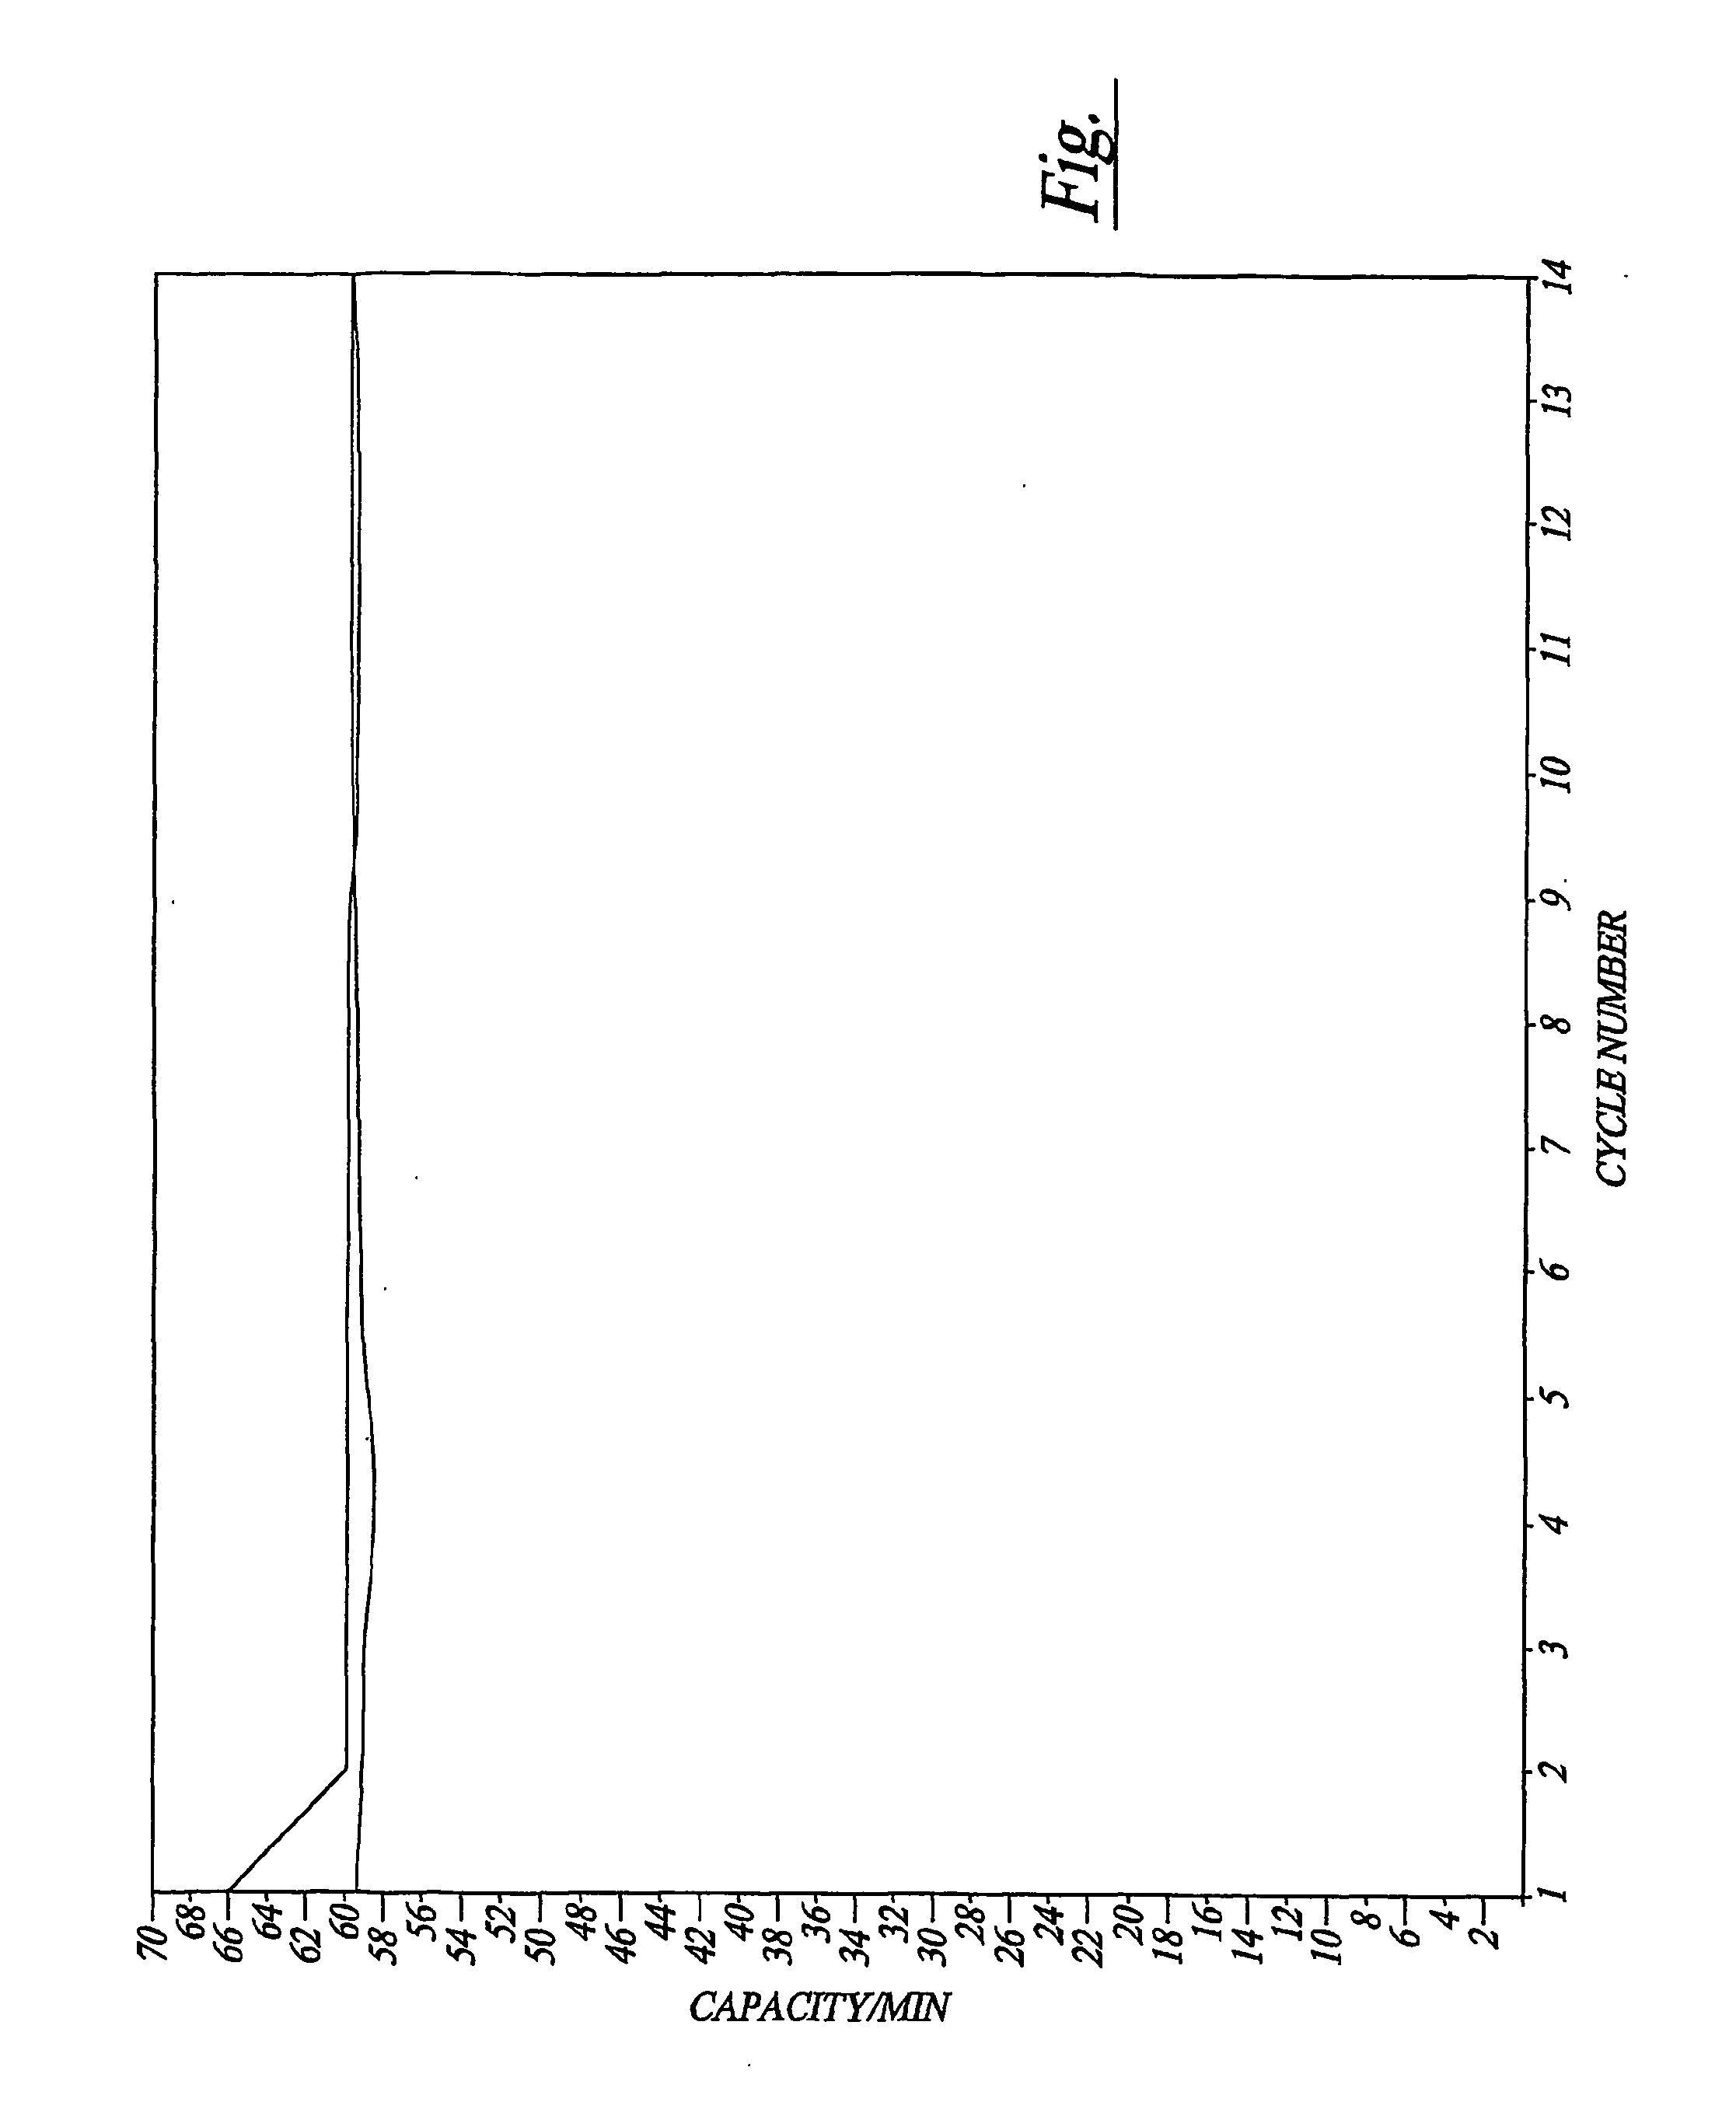 Cathode compositions and method for lithium-ion cell construction having a lithum compound additive, eliminating irreversible capacity loss